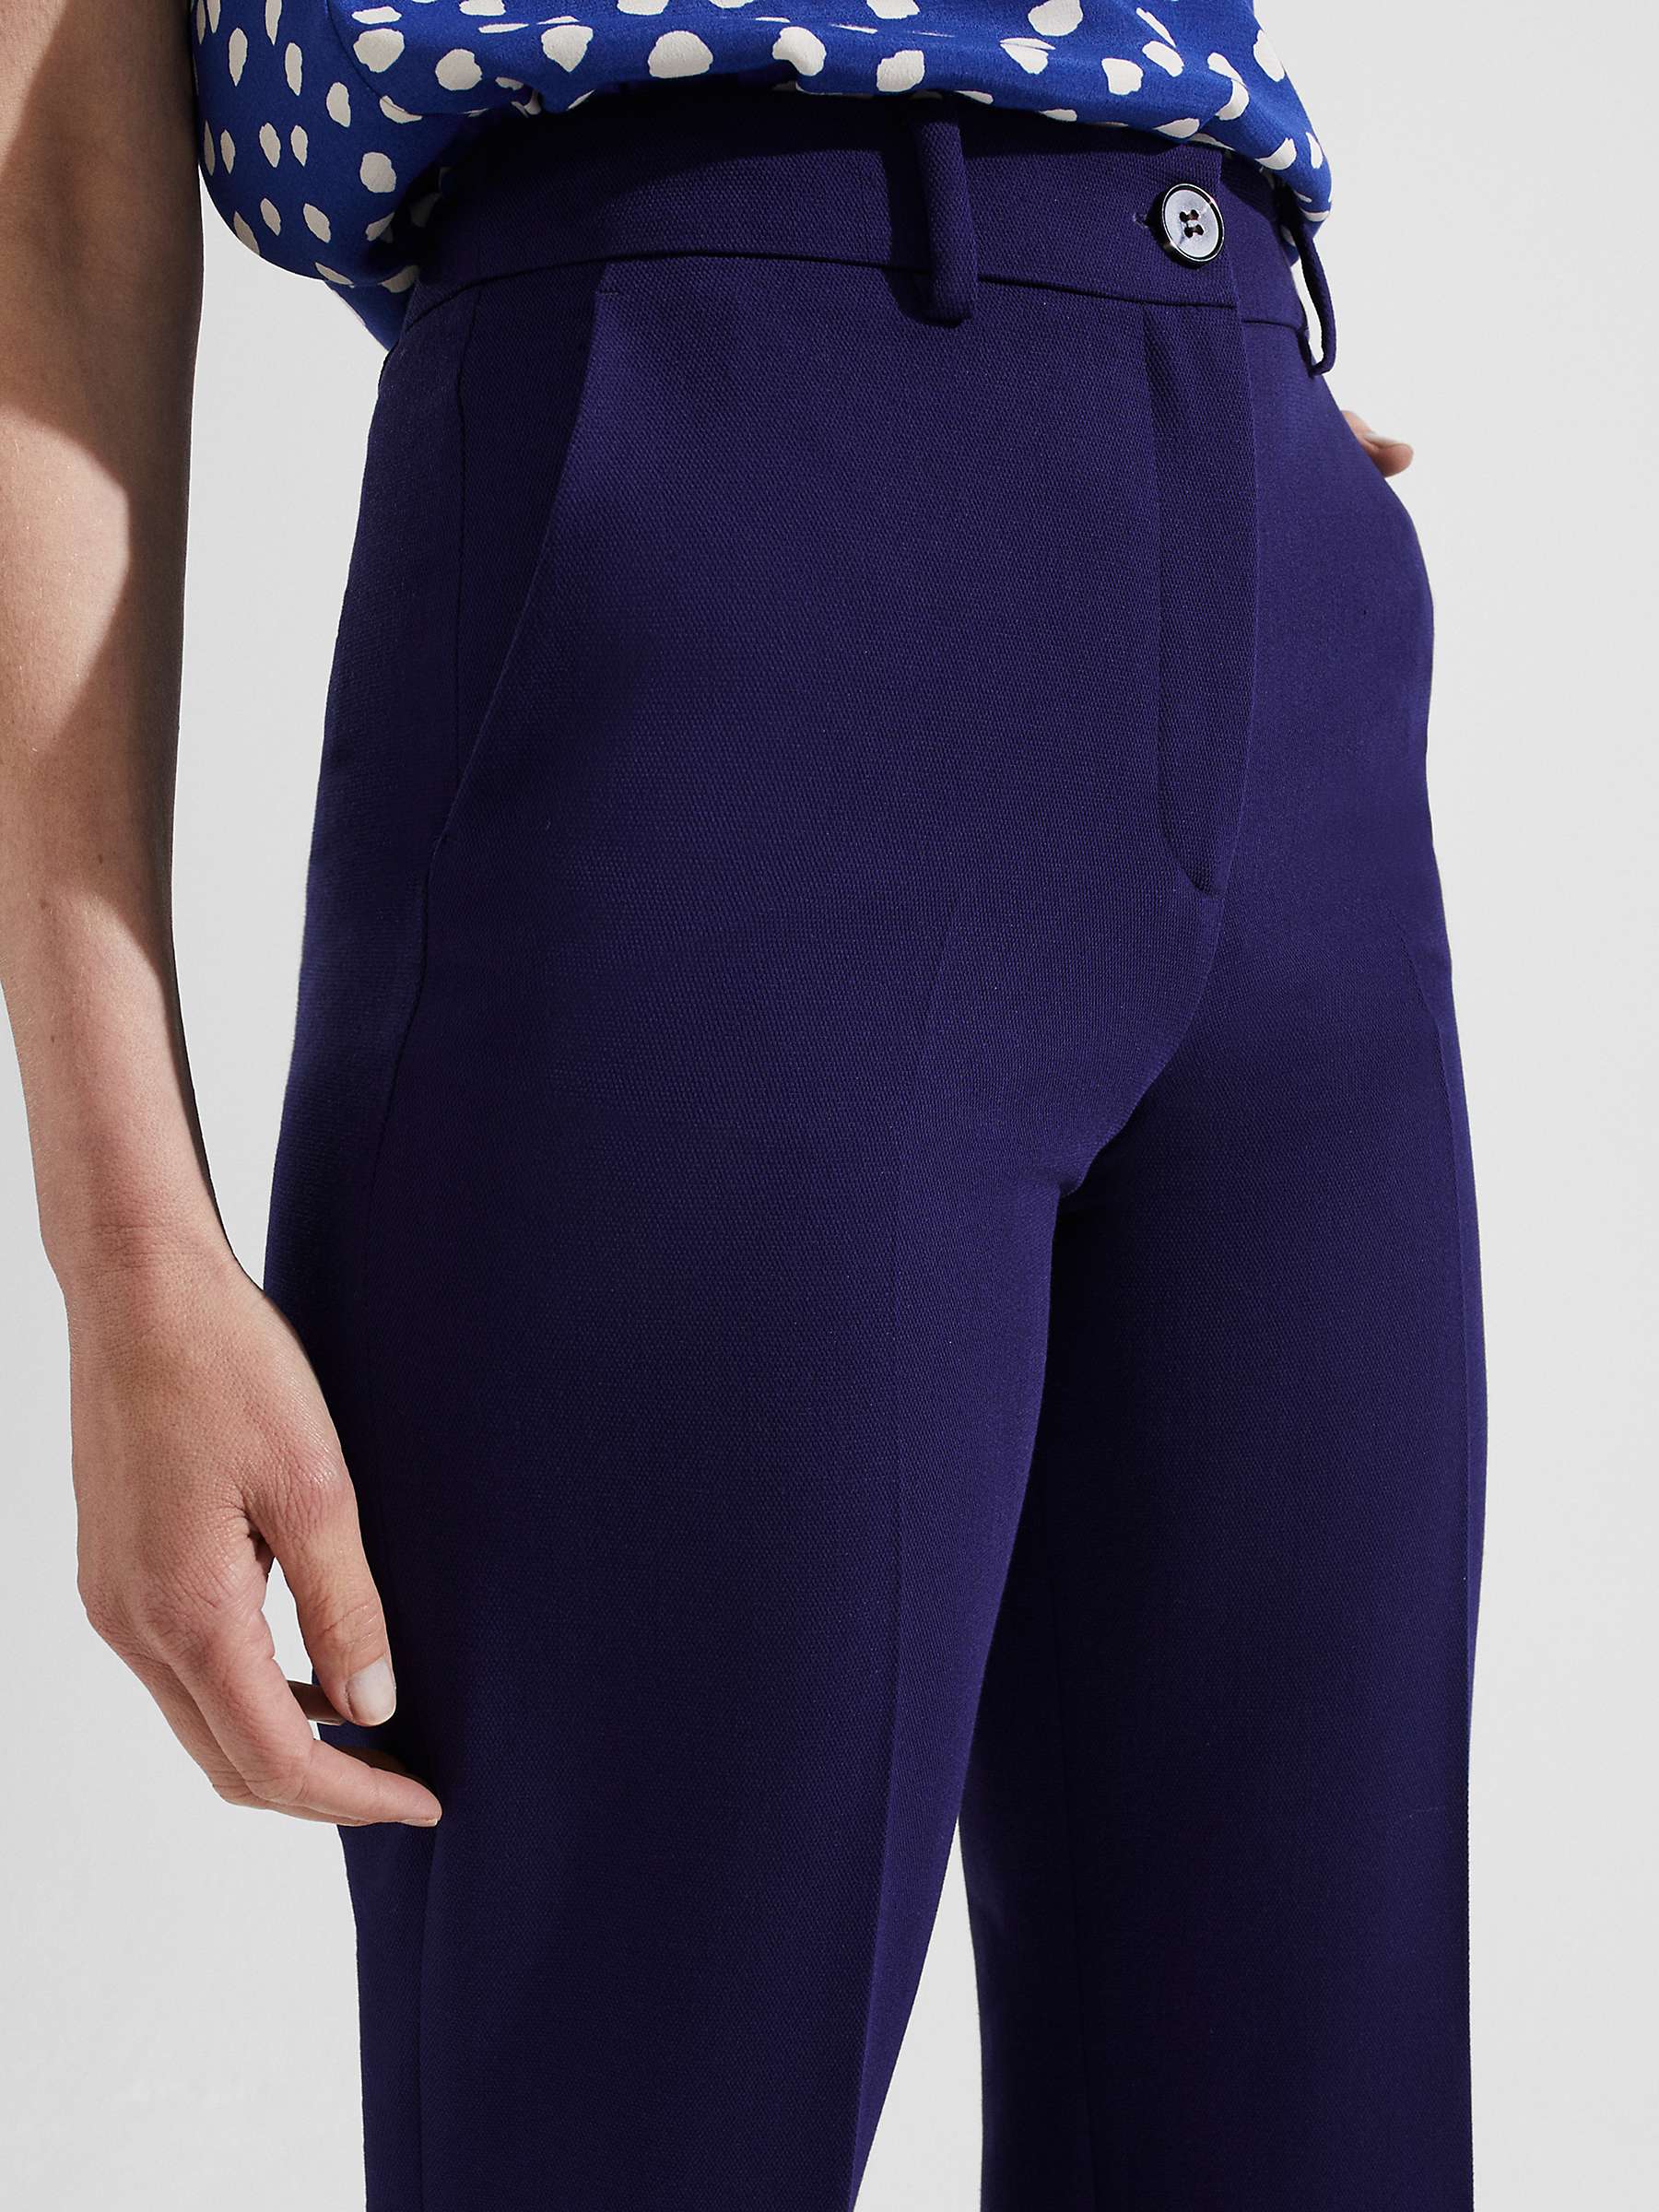 Buy Hobbs Romy Straight Cut Ankle Grazer Trousers, Rich Navy Blue Online at johnlewis.com